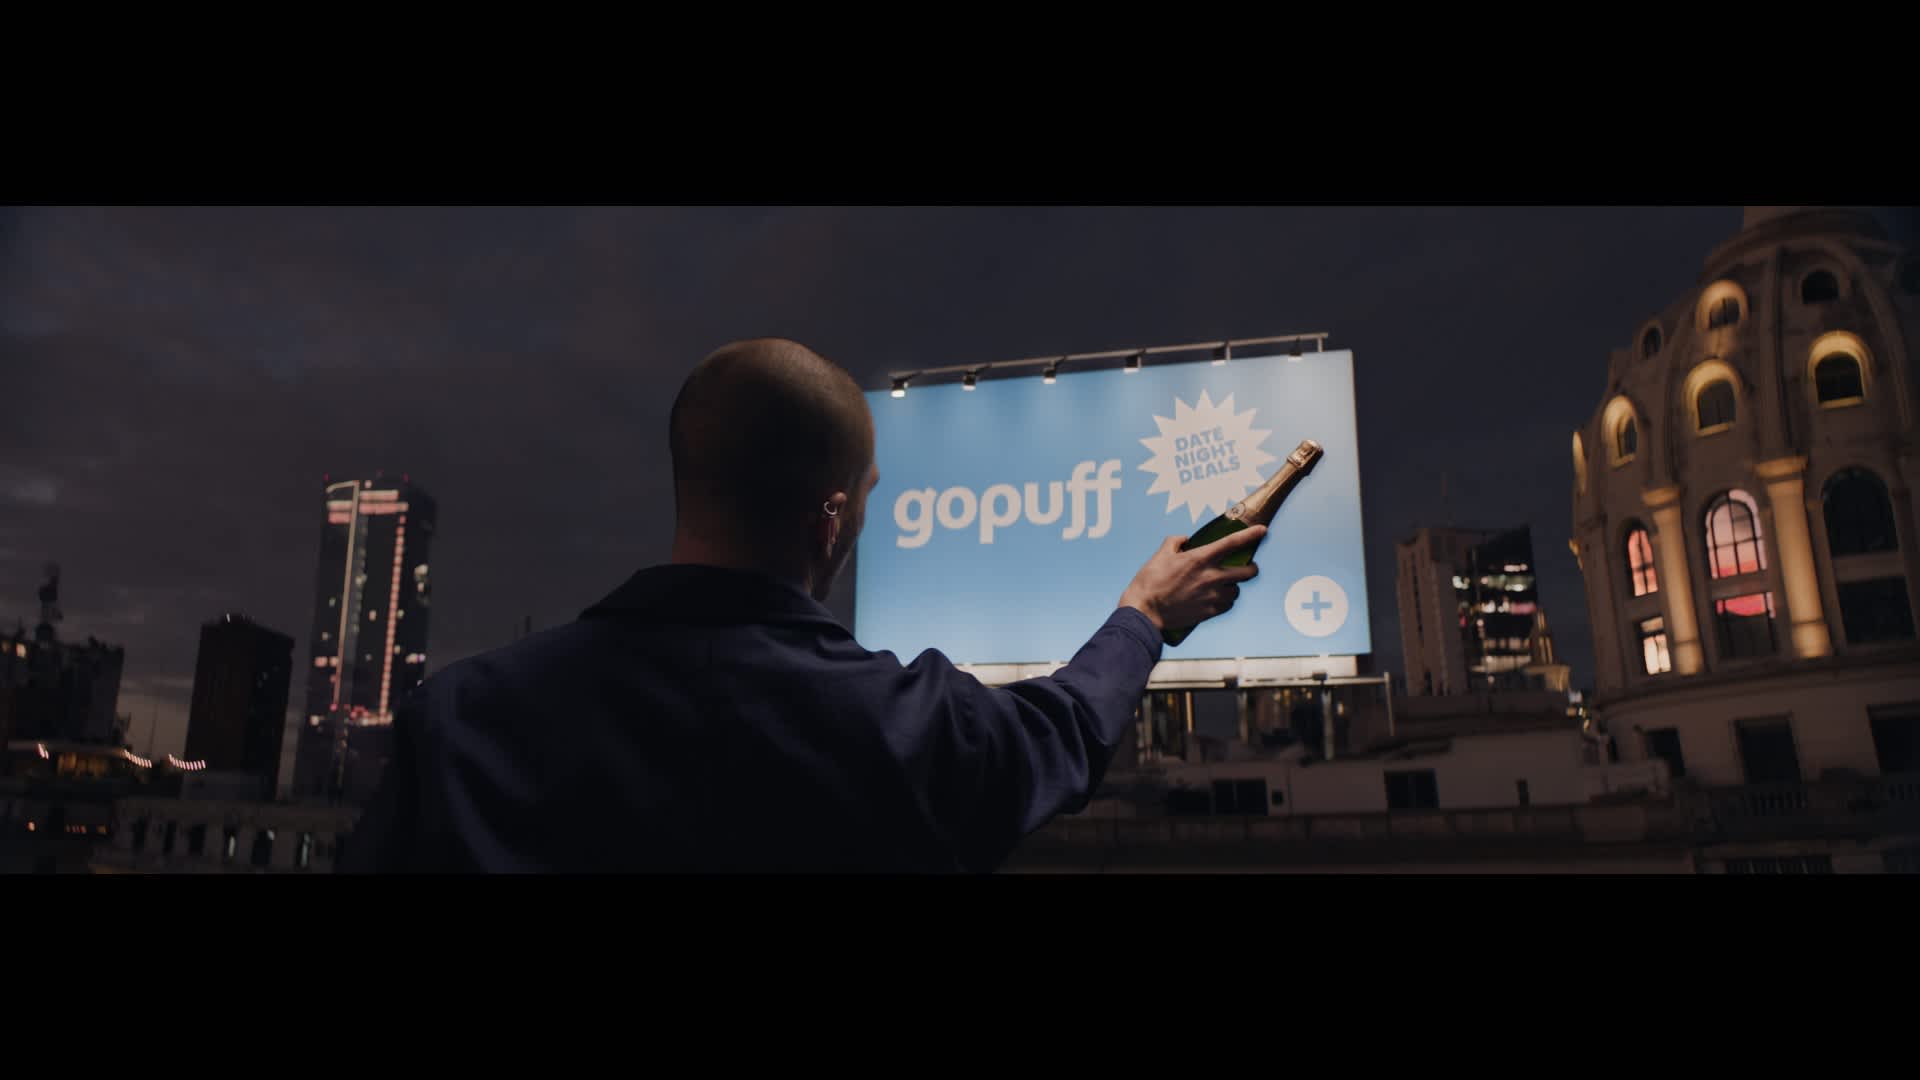 Shot from Gopuff's "Bring The Magic" film. Protagonist plucks a bottle of bubbly from a billboard. 